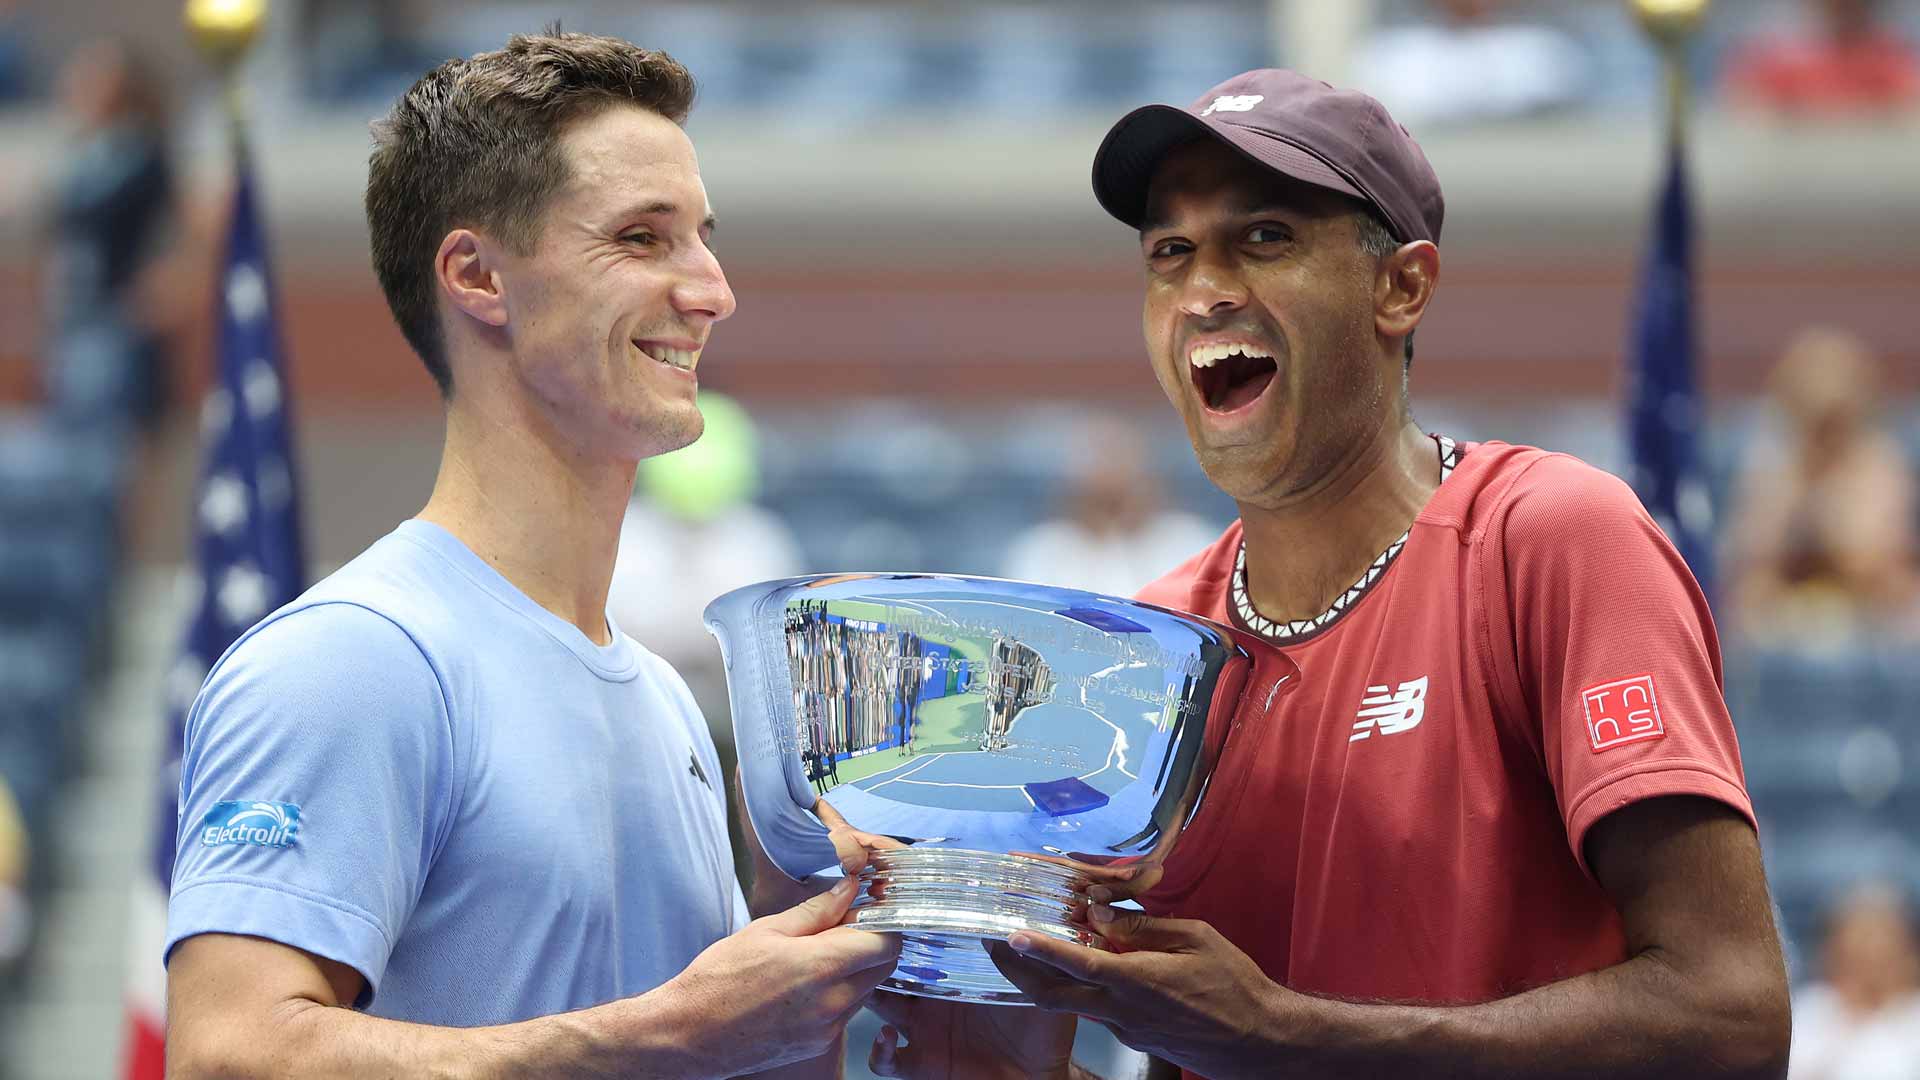 Joe Salisbury and Rajeev Ram are crowned champions at the 2023 US Open.